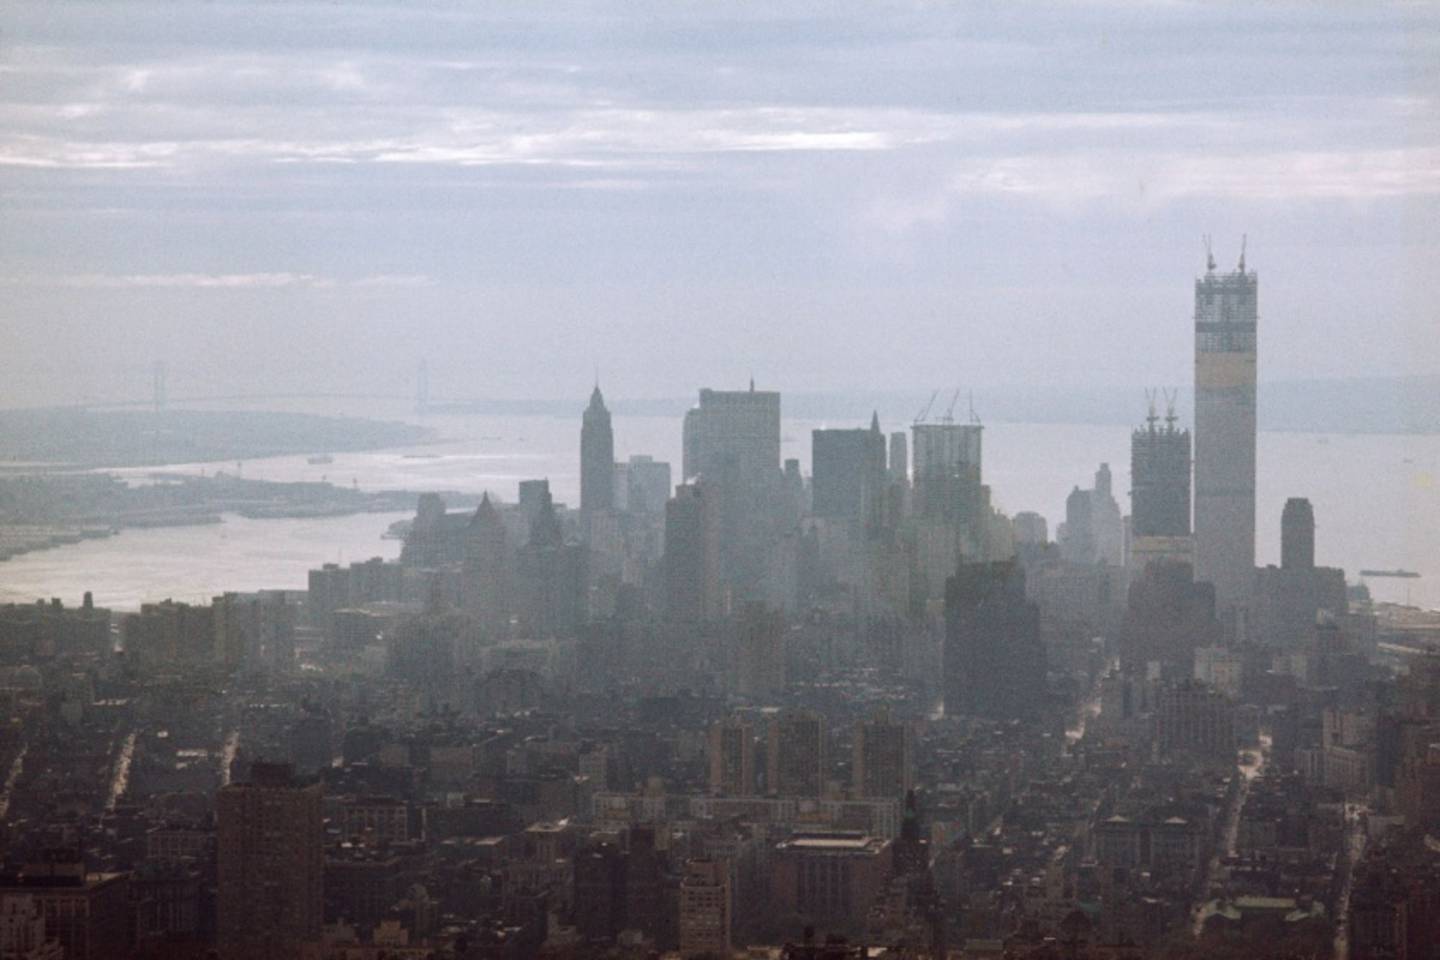 Looking south from the Empire State building, 1970.dfd